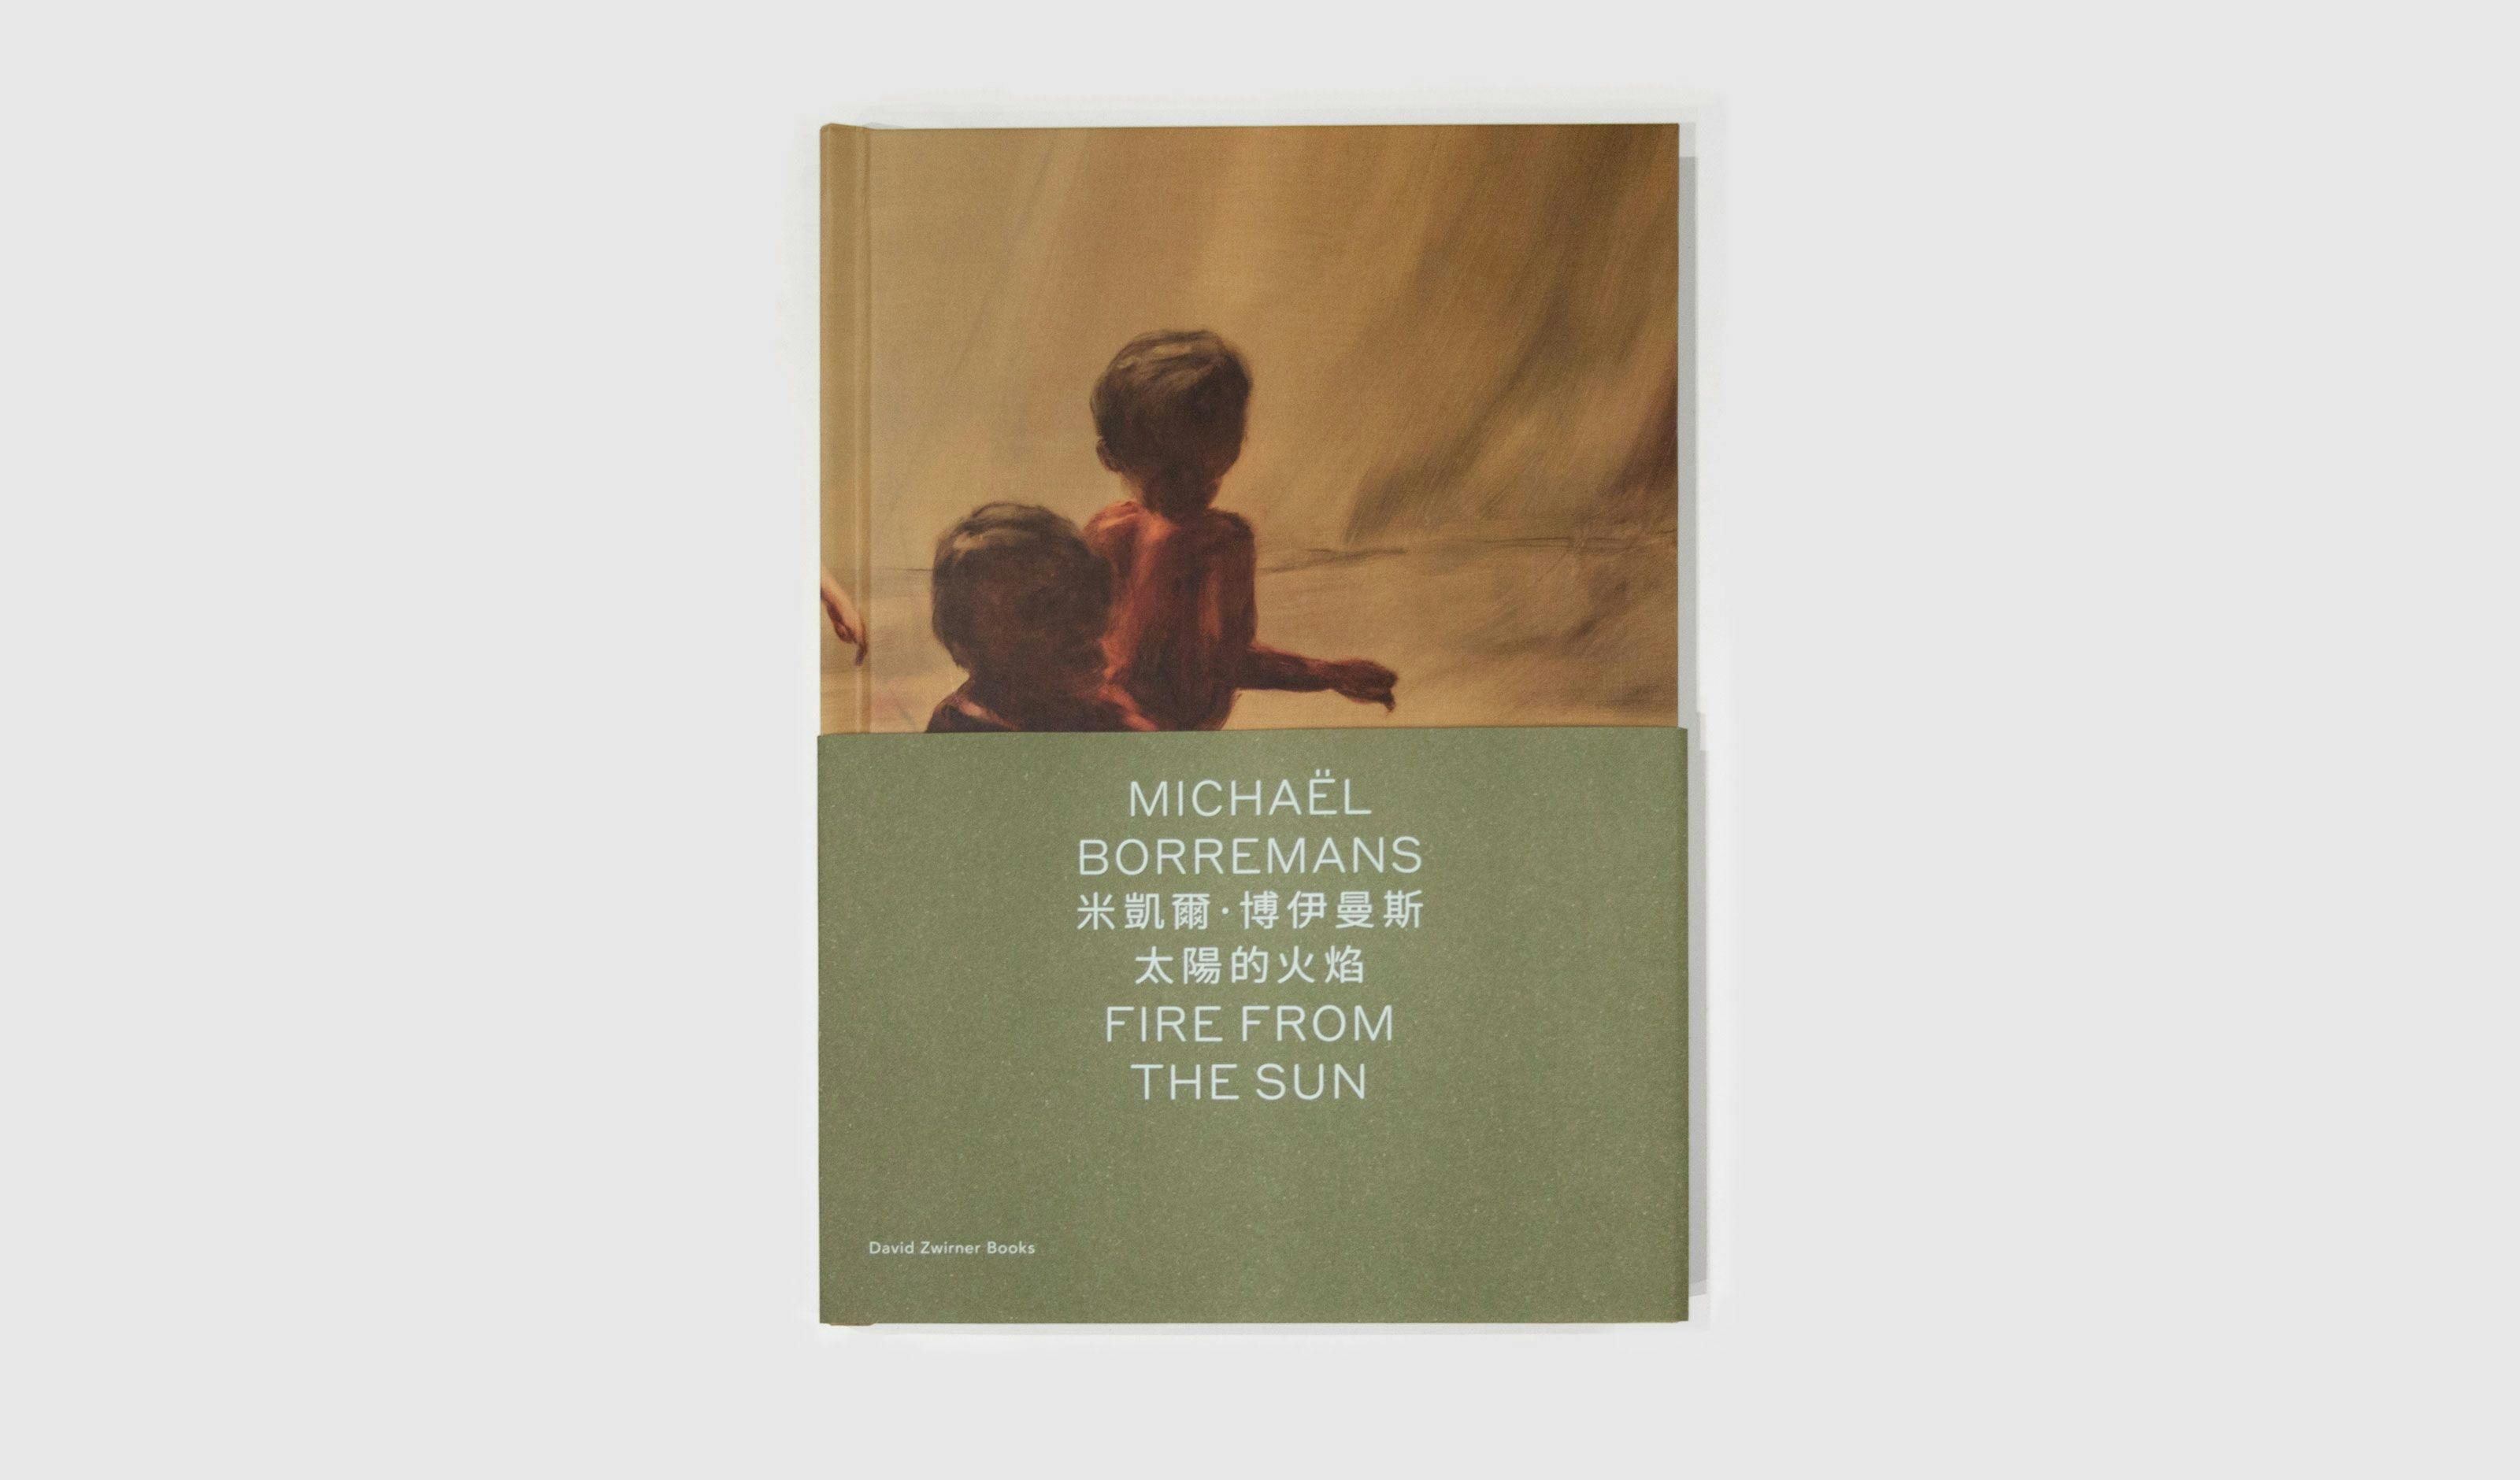 Front cover of a book titled Michaël Borremans: Fire from the Sun, published by David Zwirner books in 2018.